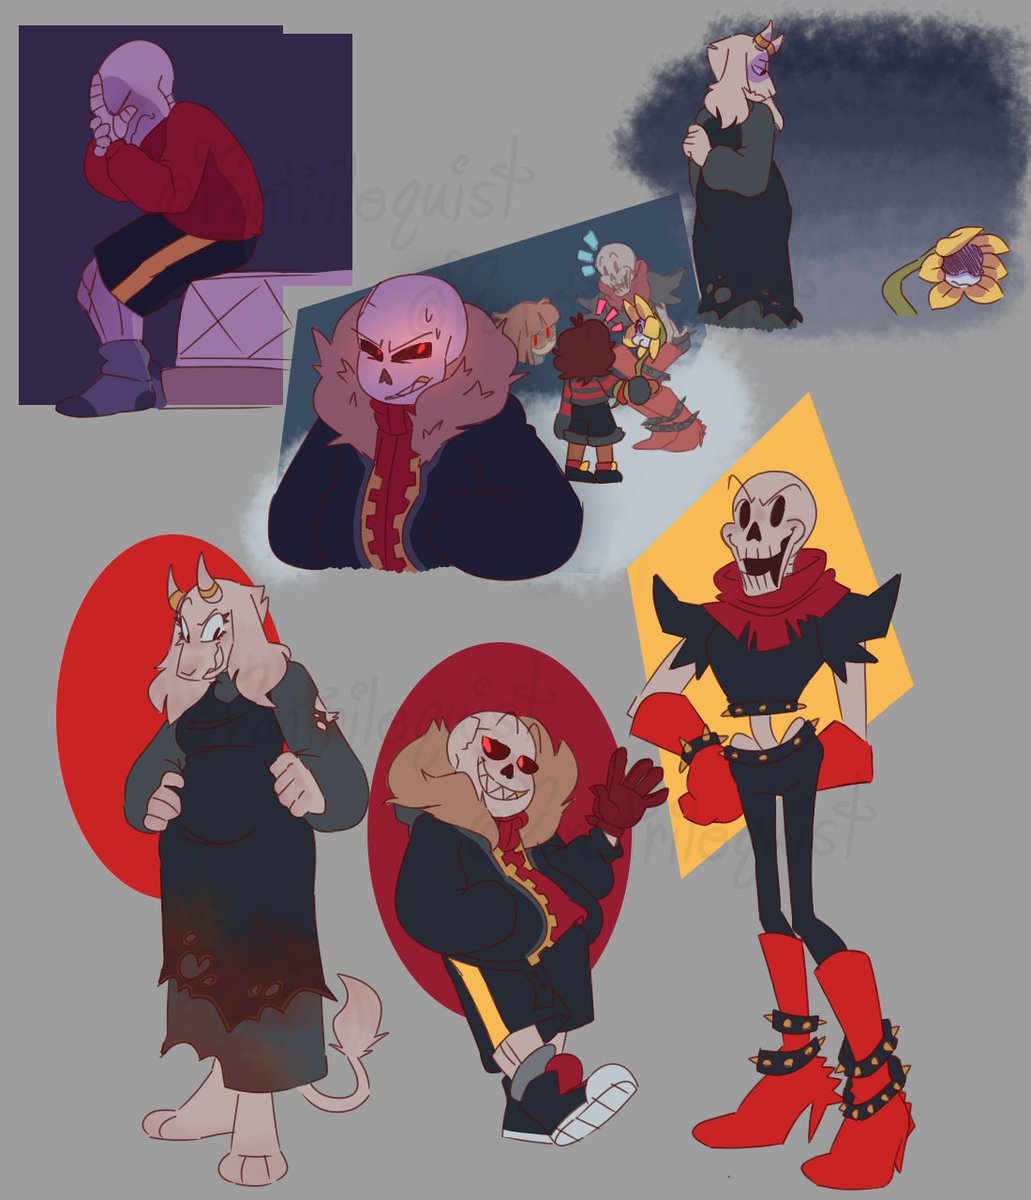 My Underfell take part 2: Toriel, Sans an Paps!

Sans is mostly the same (if it ain't broke don't fix it) but I think he's different personality wise? I'll explain it in the thread with the lore

#UNDERTALE #UNDERTALEAU #UNDERFELL #SansUNDERTALE #TorielDreemurr #TheGreatPapyrus